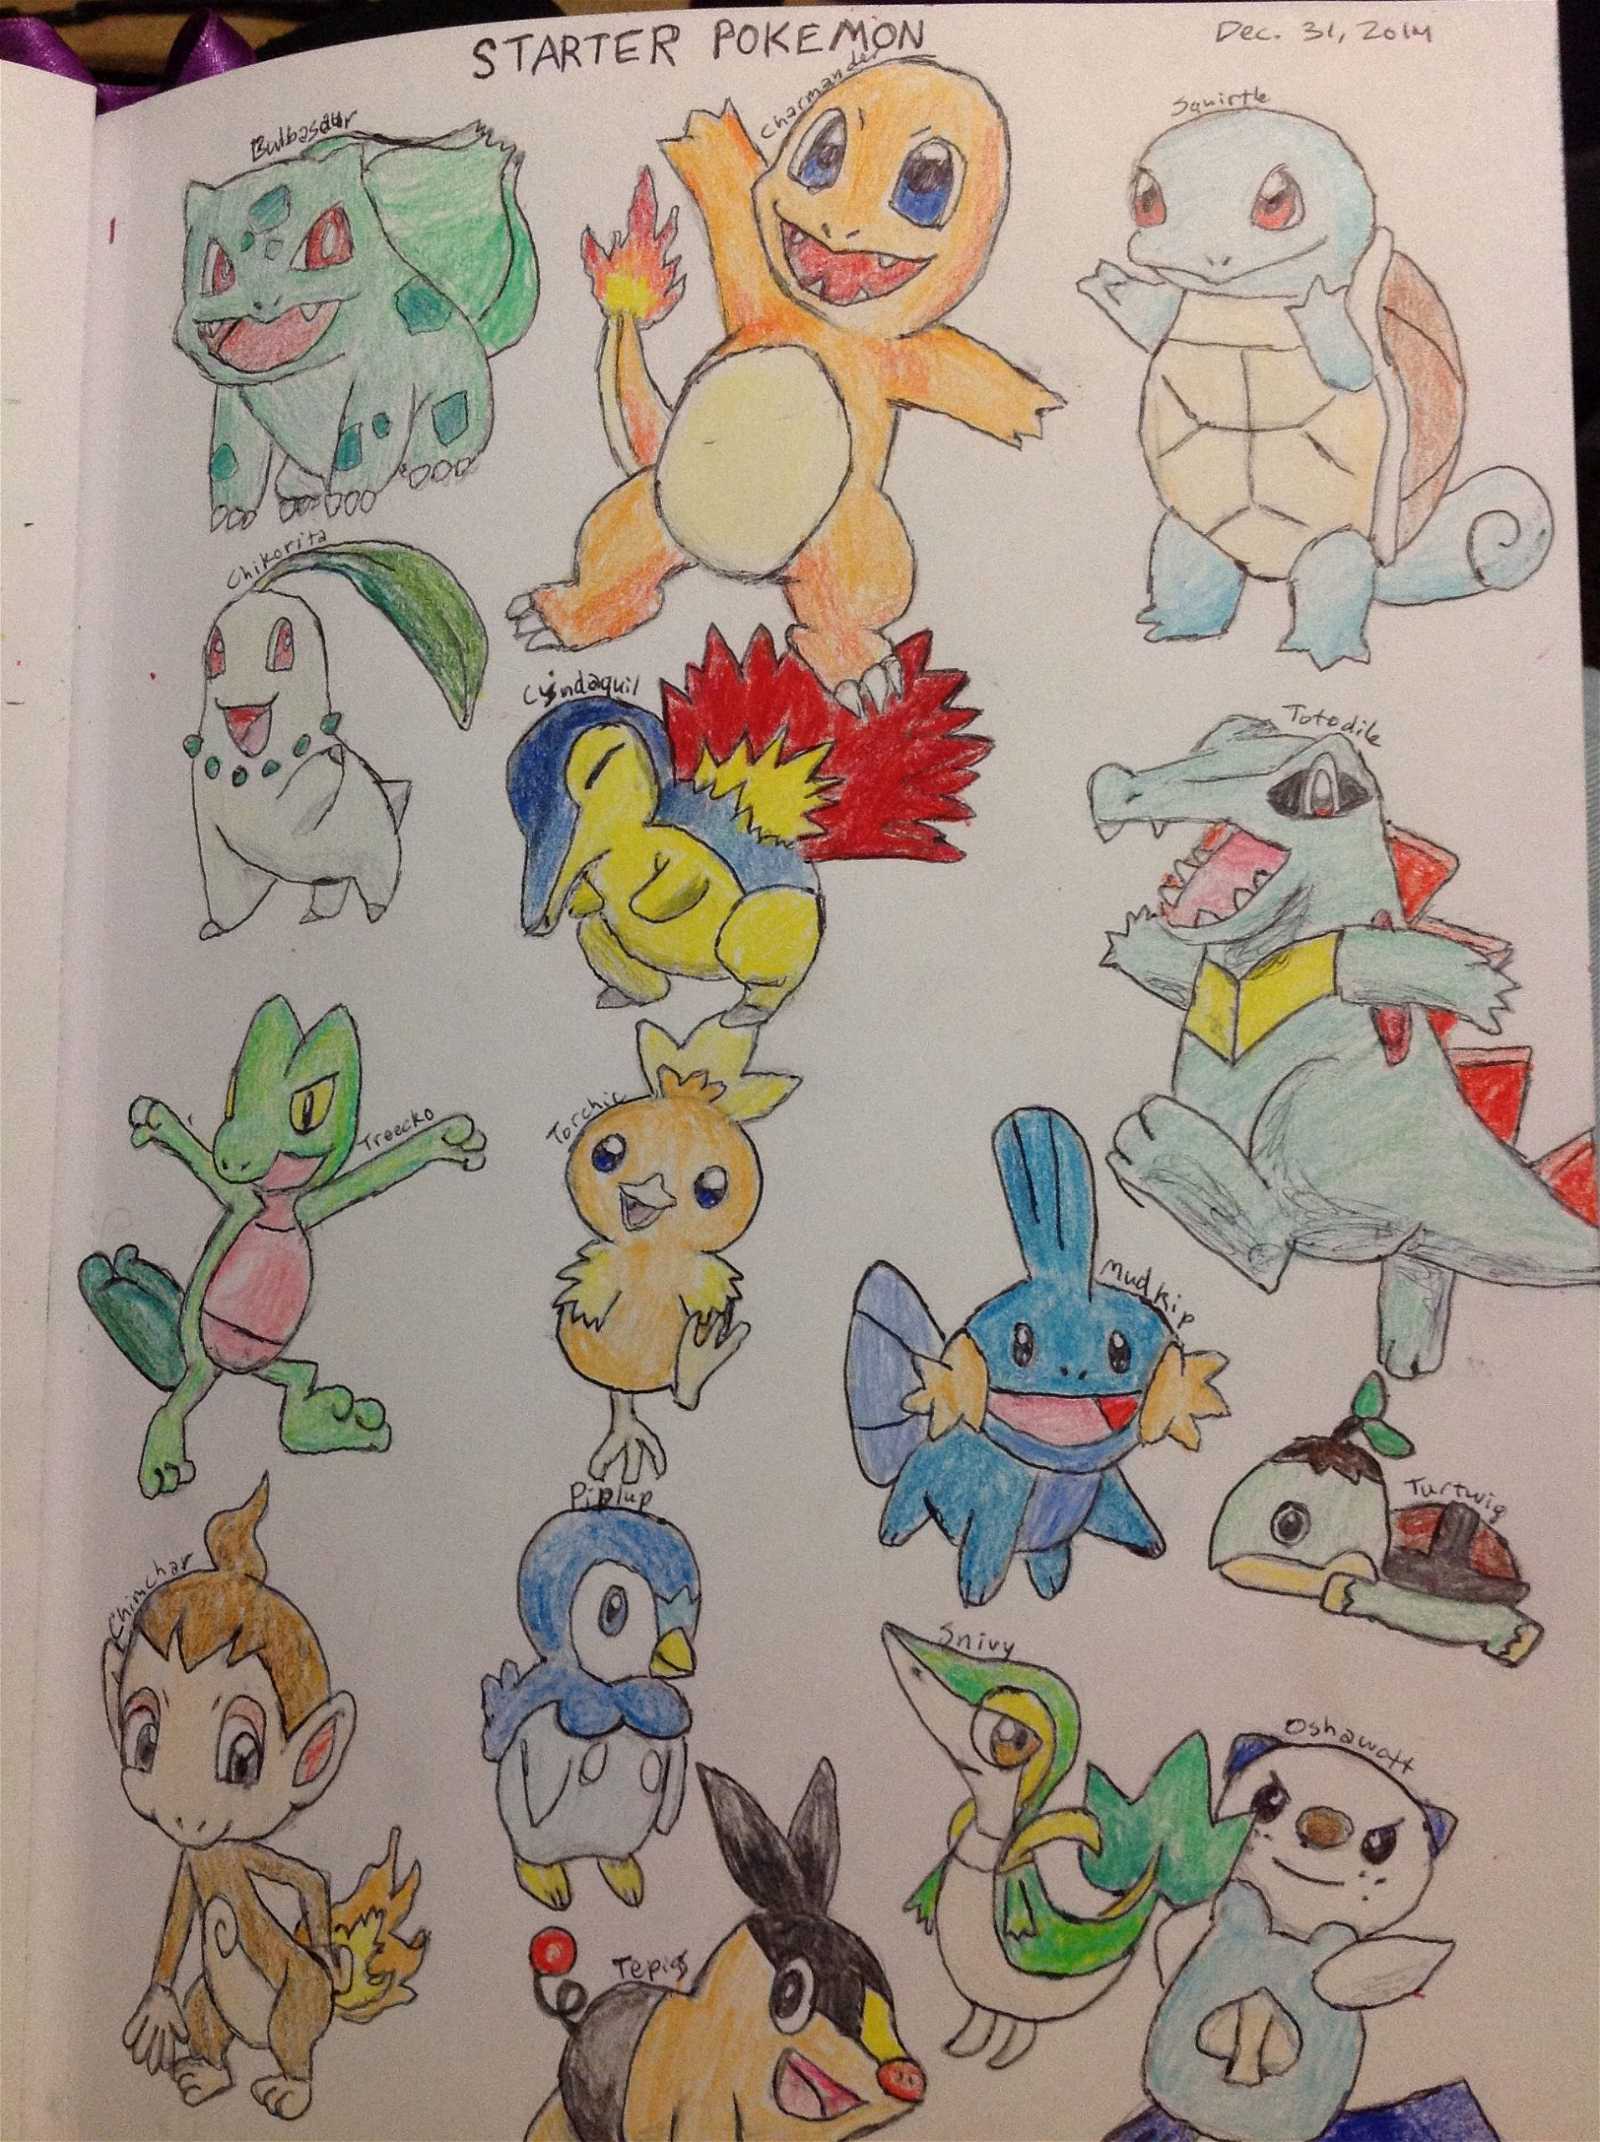 Finished the year by drawing way too many starter pokemon ...